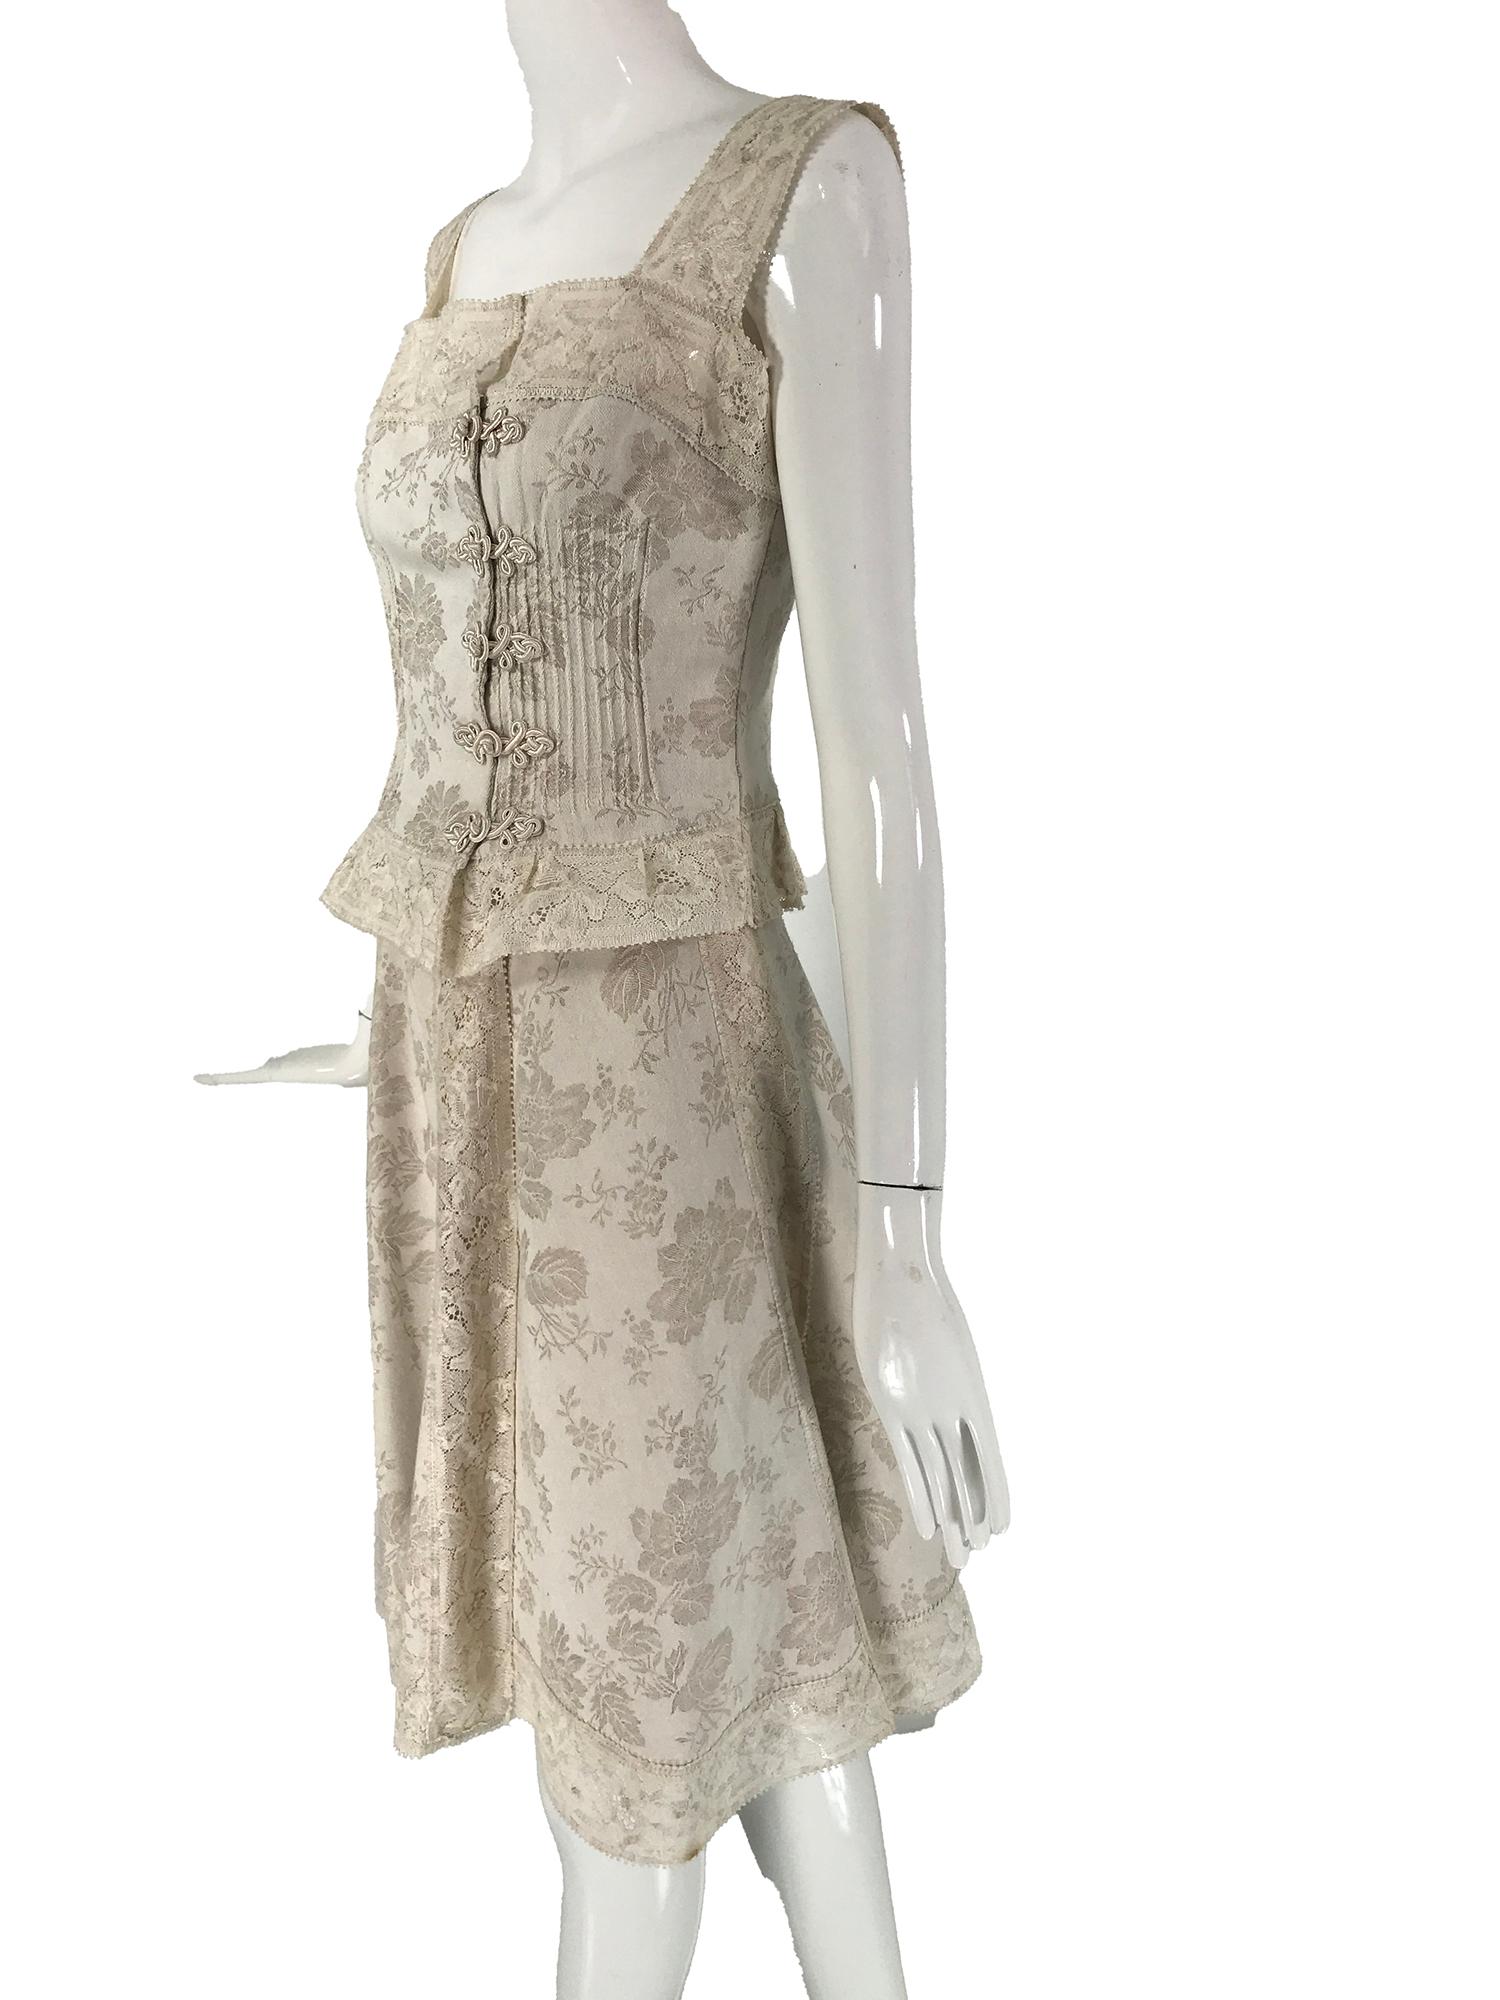 Valentino Boutique Ivory Floral Damask Linen & Lace Camisole Top & Skirt 1980s 3